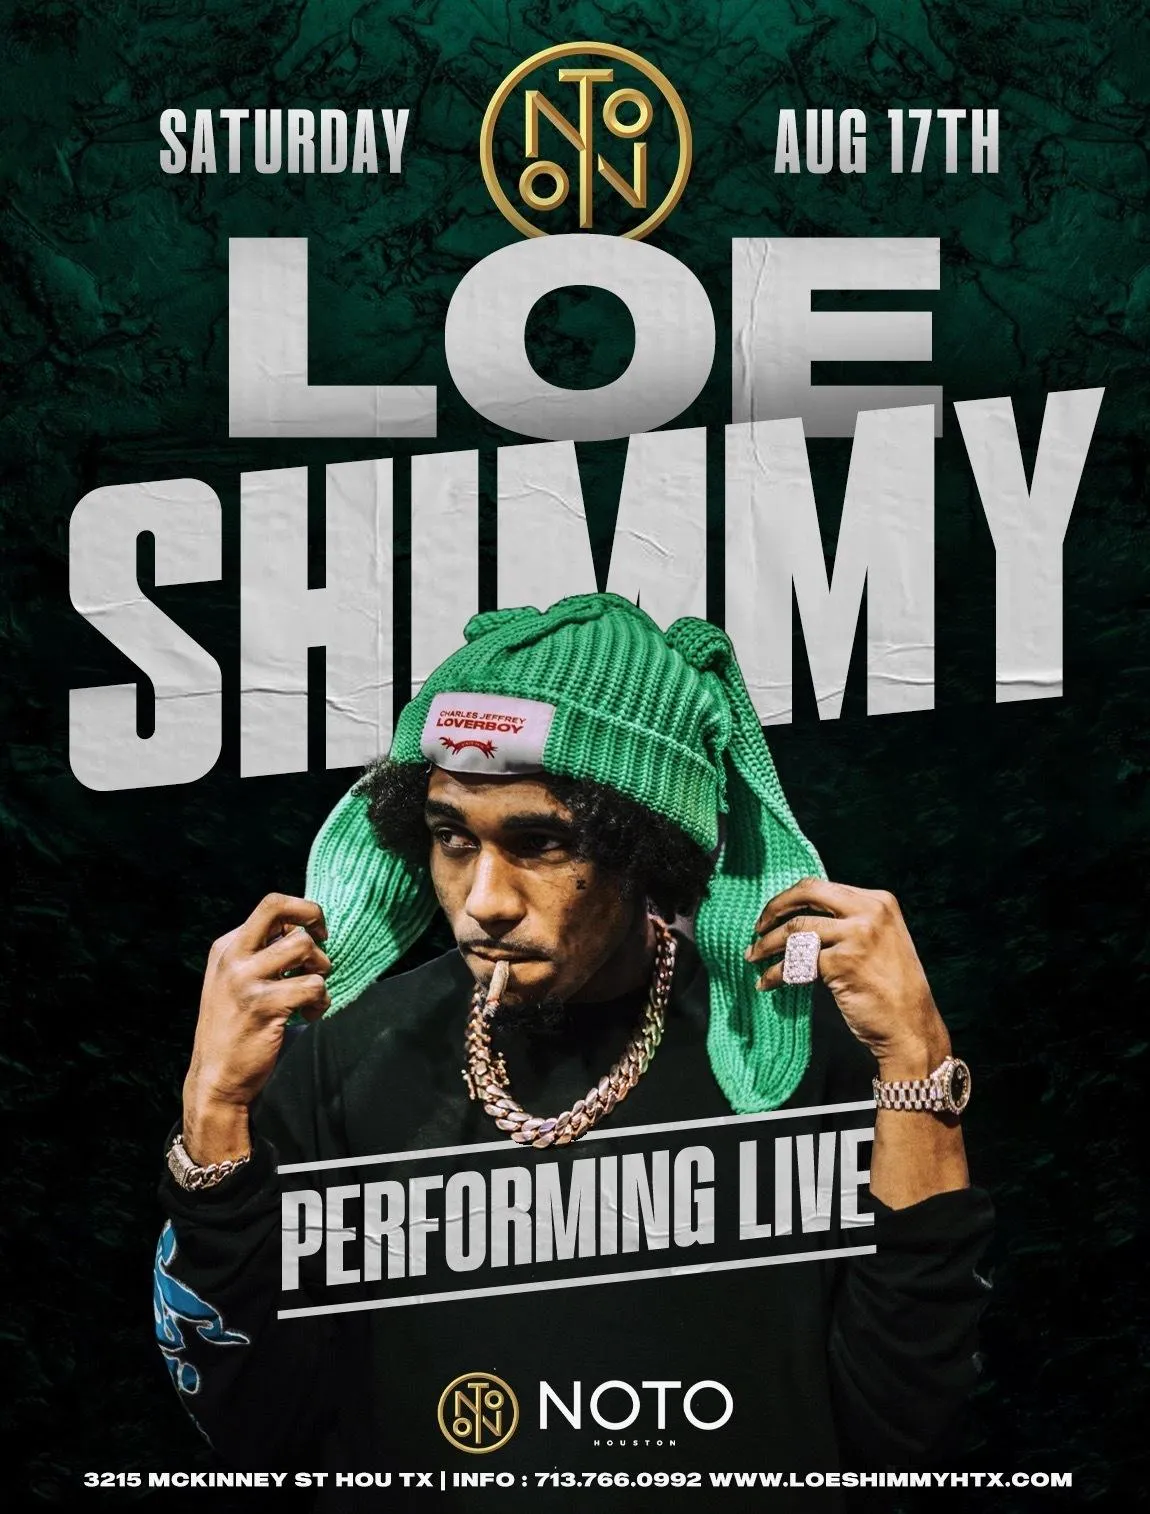 Loe Shimmy Live in Concert at Noto Aug 17th